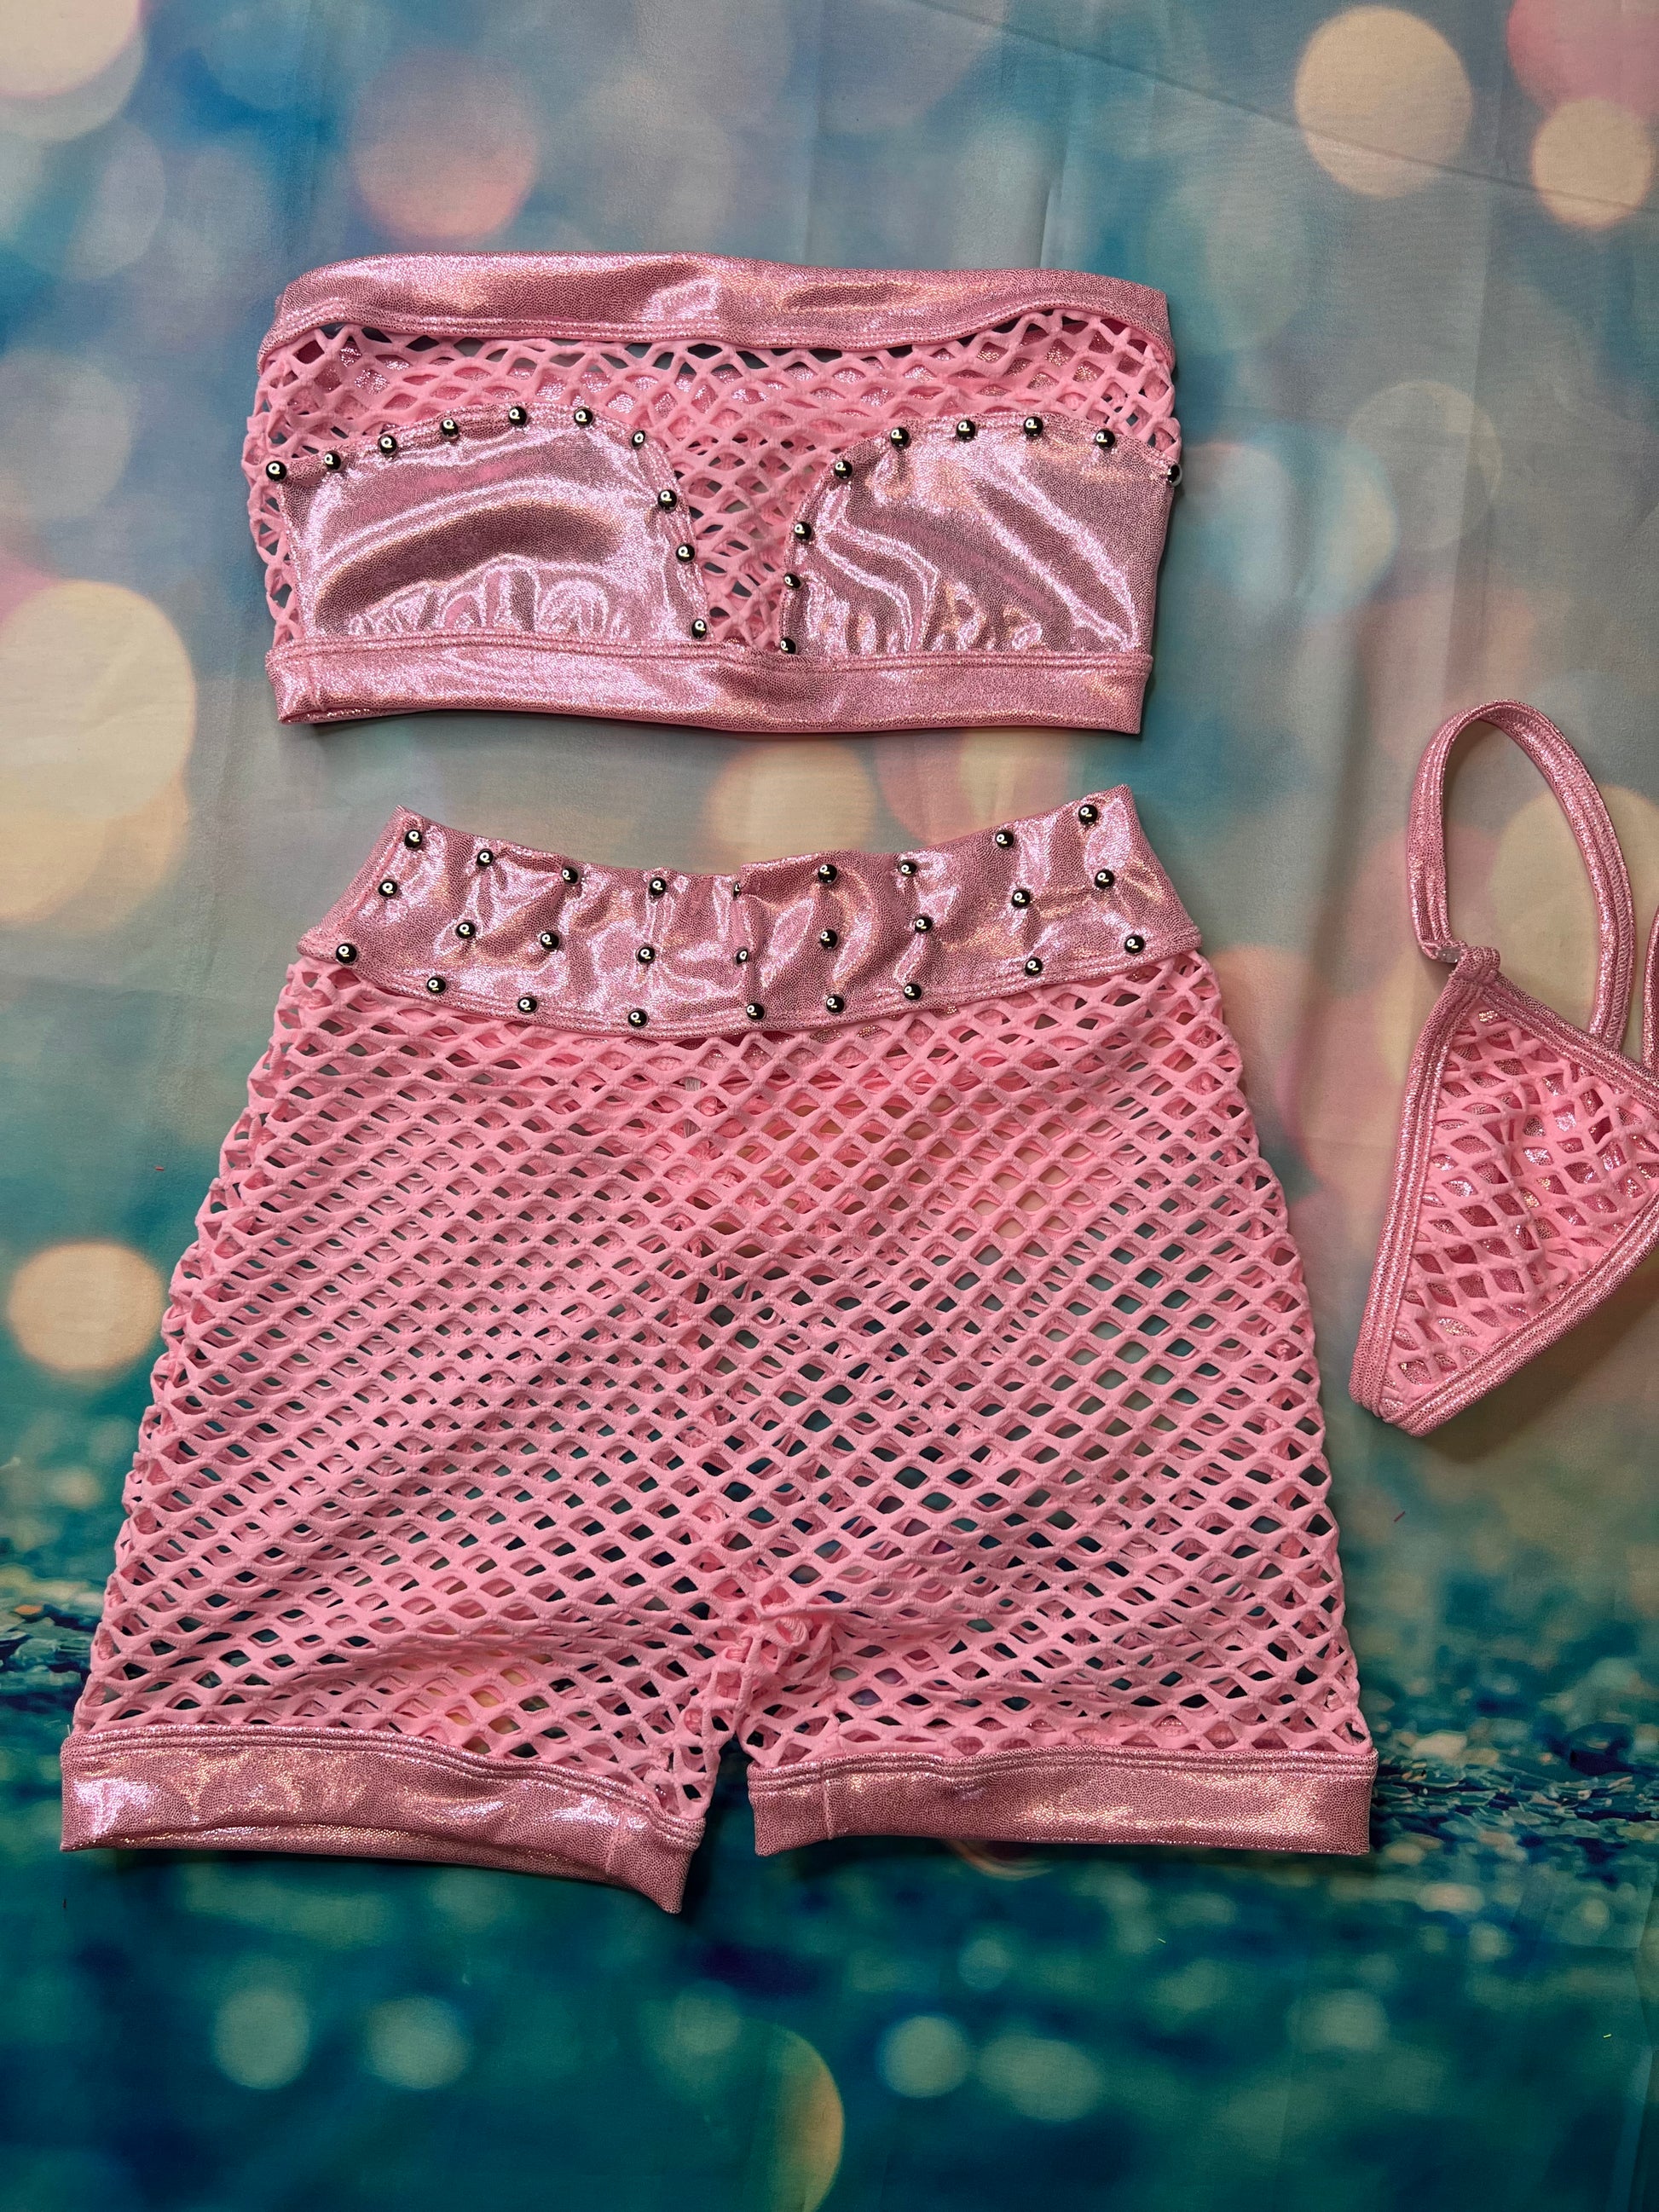 Baby Pink Two-Piece Exotic Dance Wear Outfit Passionate Dancer